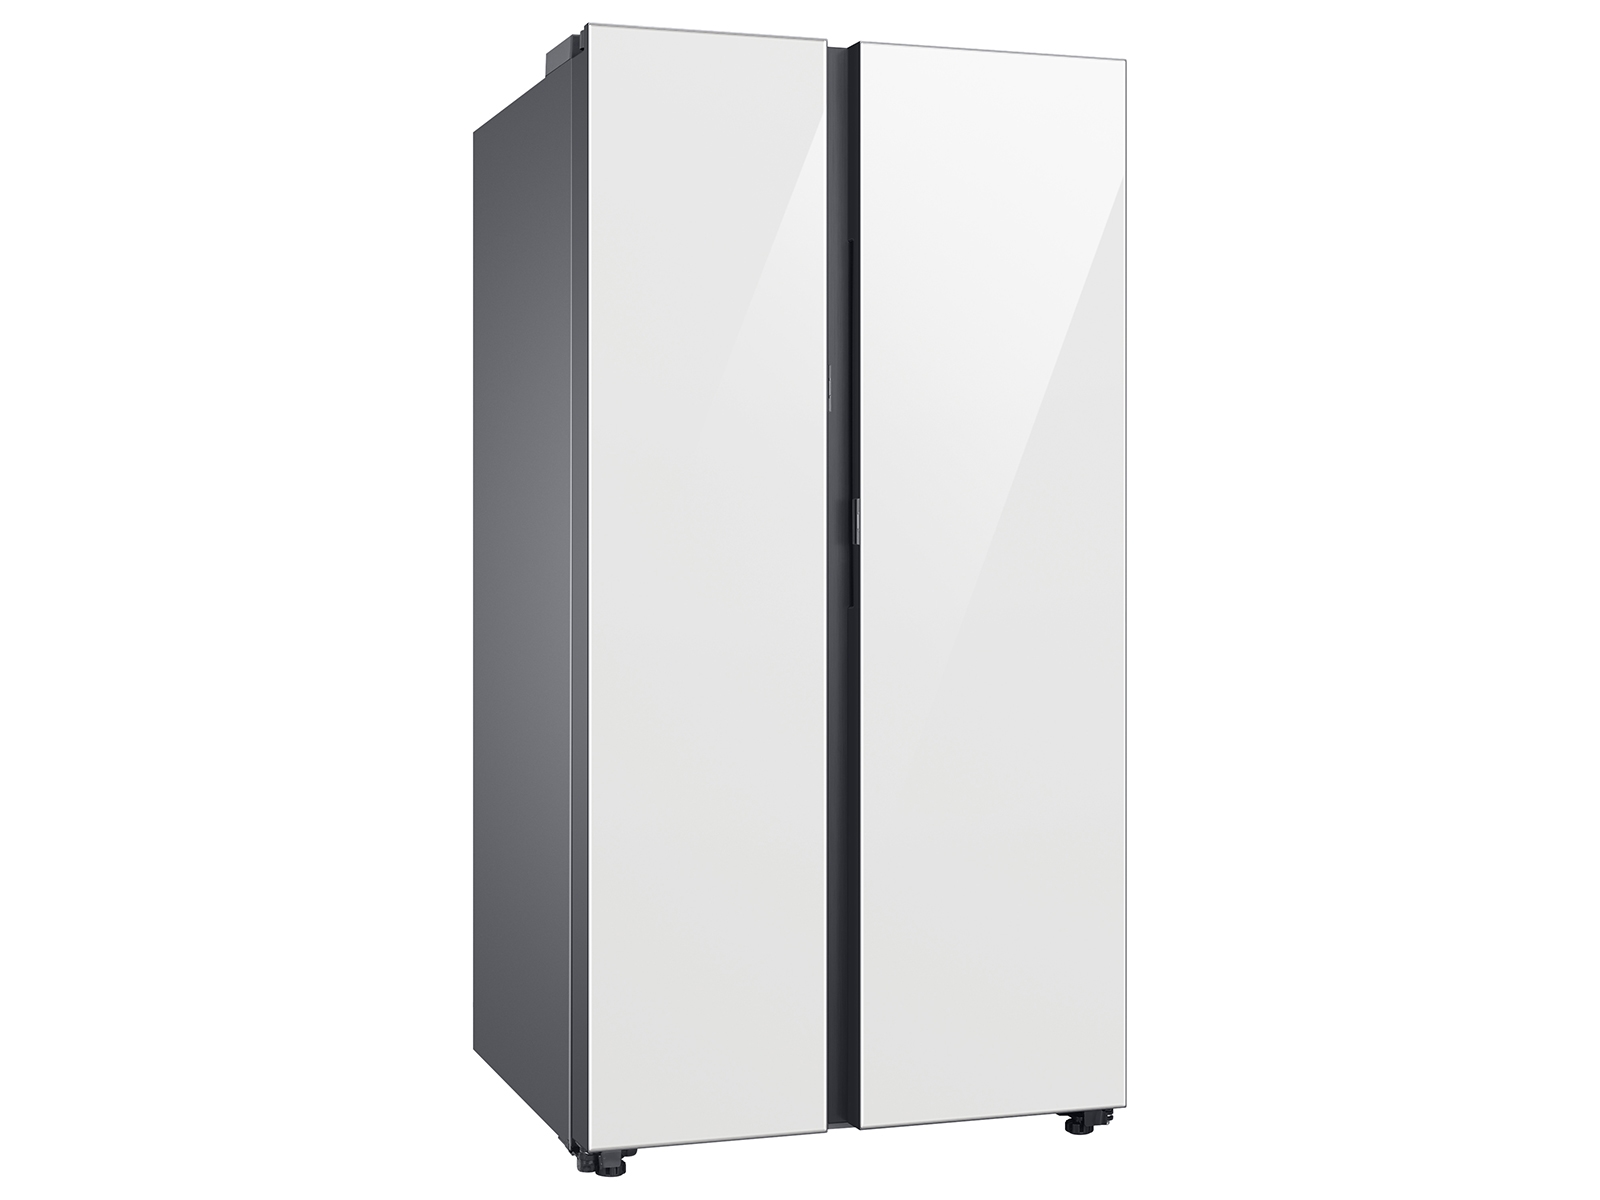 Center Beverage 28 Samsung cu. in Glass Refrigerator Side-by-side ft. | White US with Bespoke